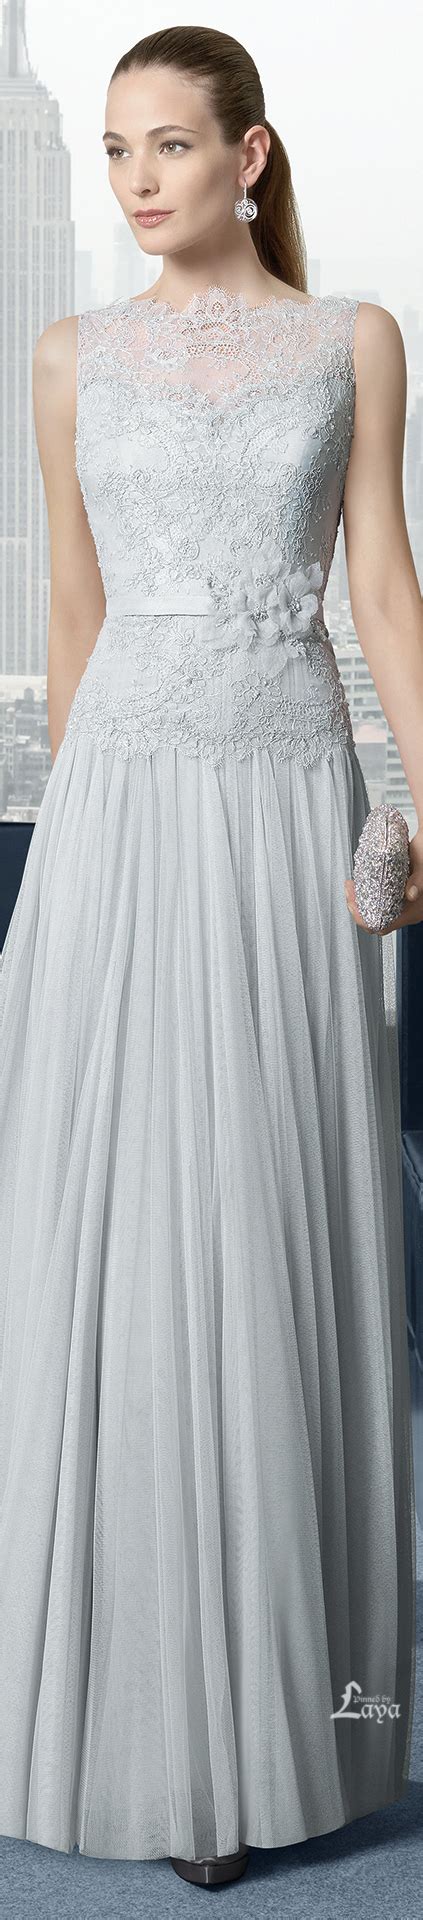 American actress grace kelly set the standard for royal weddings in her 1956 marriage to prince the dress broke down into 10 parts. ROSA CLARÁ 2015. This is a gown I could envision Grace ...